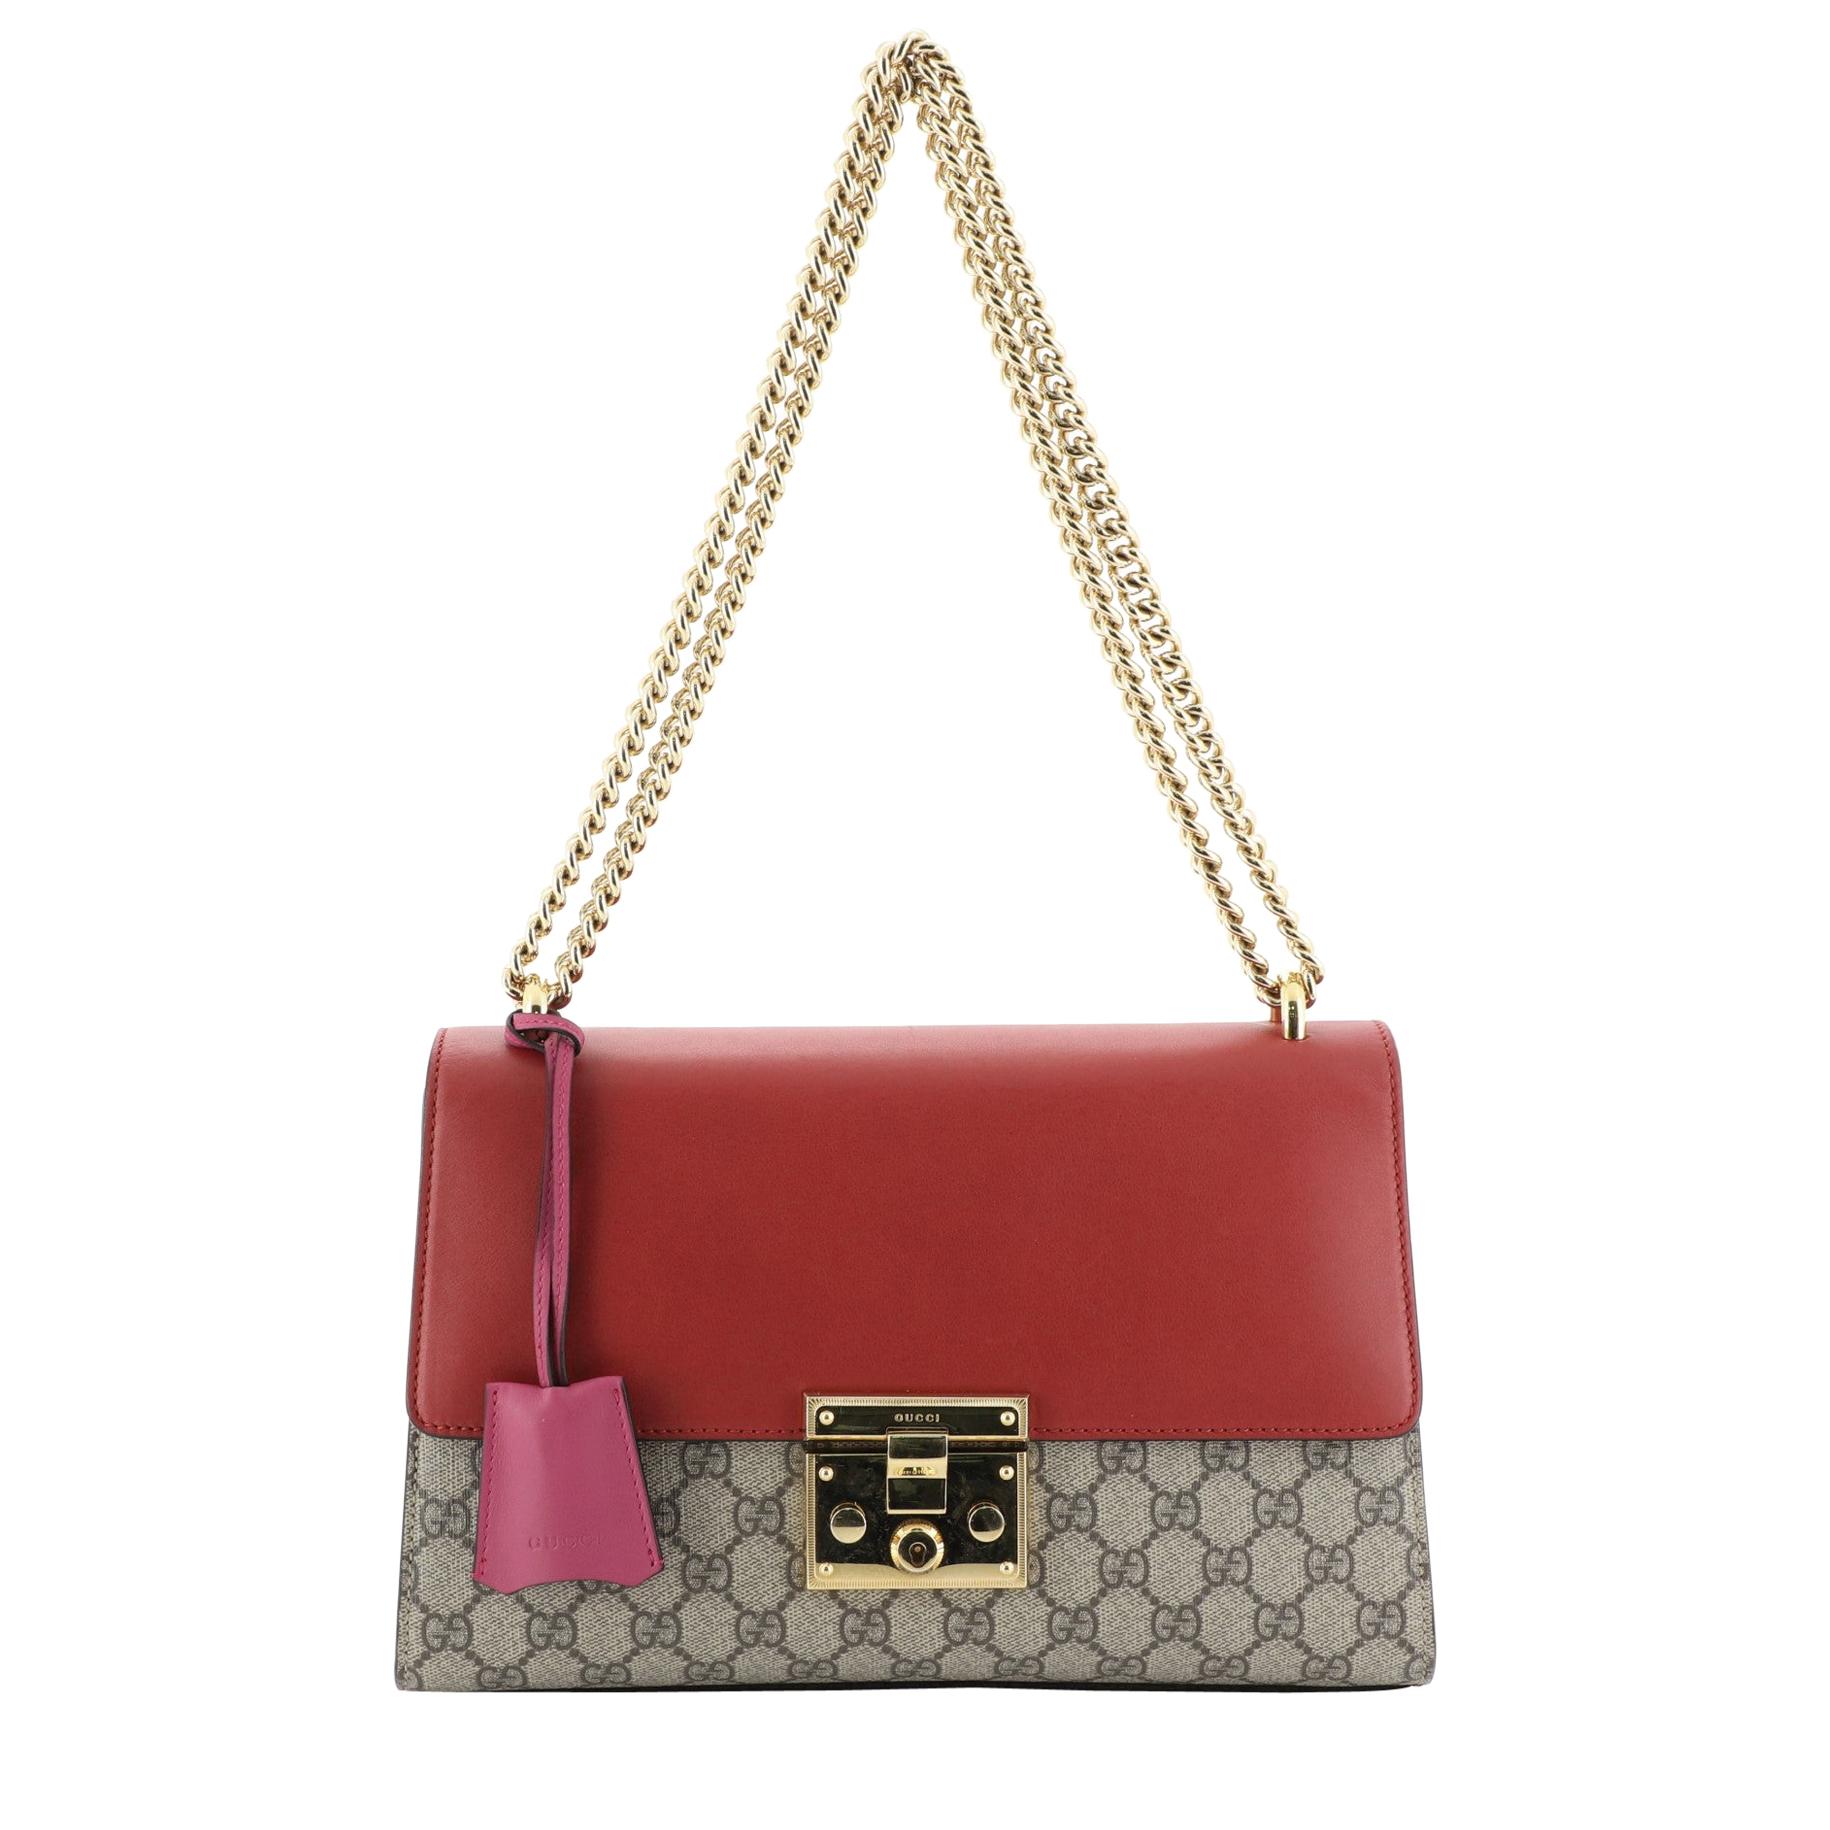 Gucci Padlock Shoulder Bag GG Coated Canvas And Leather Medium 